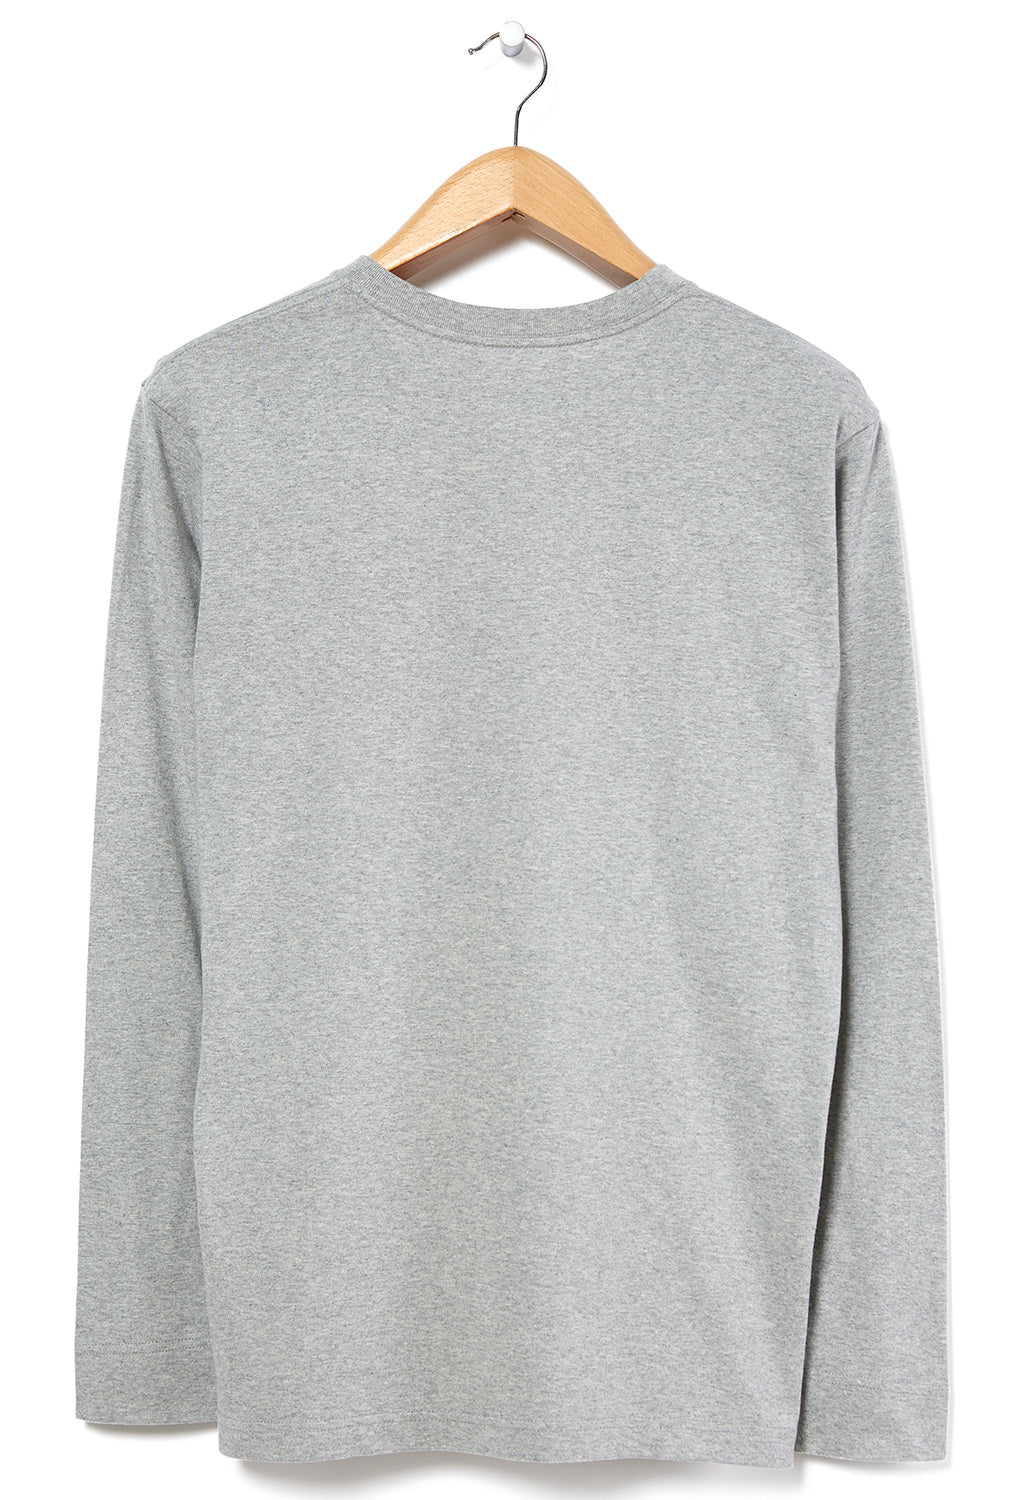 Montbell Men's Pear Skin Cotton Long Sleeve T-Shirt - Heather Grey